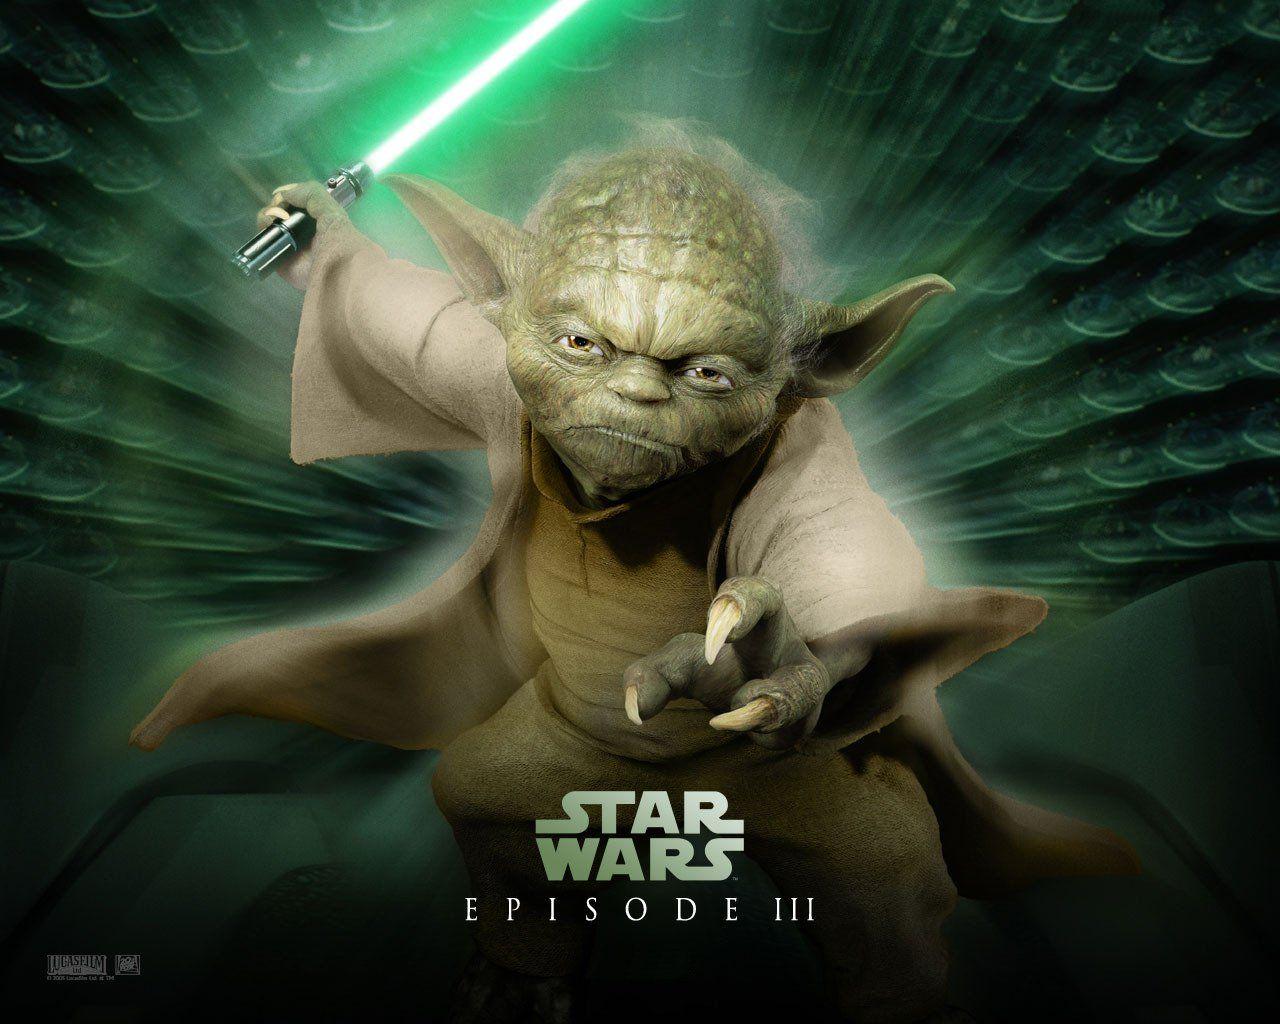 Star Wars Episode III: Revenge of the Sith HD Wallpaper and Background Image